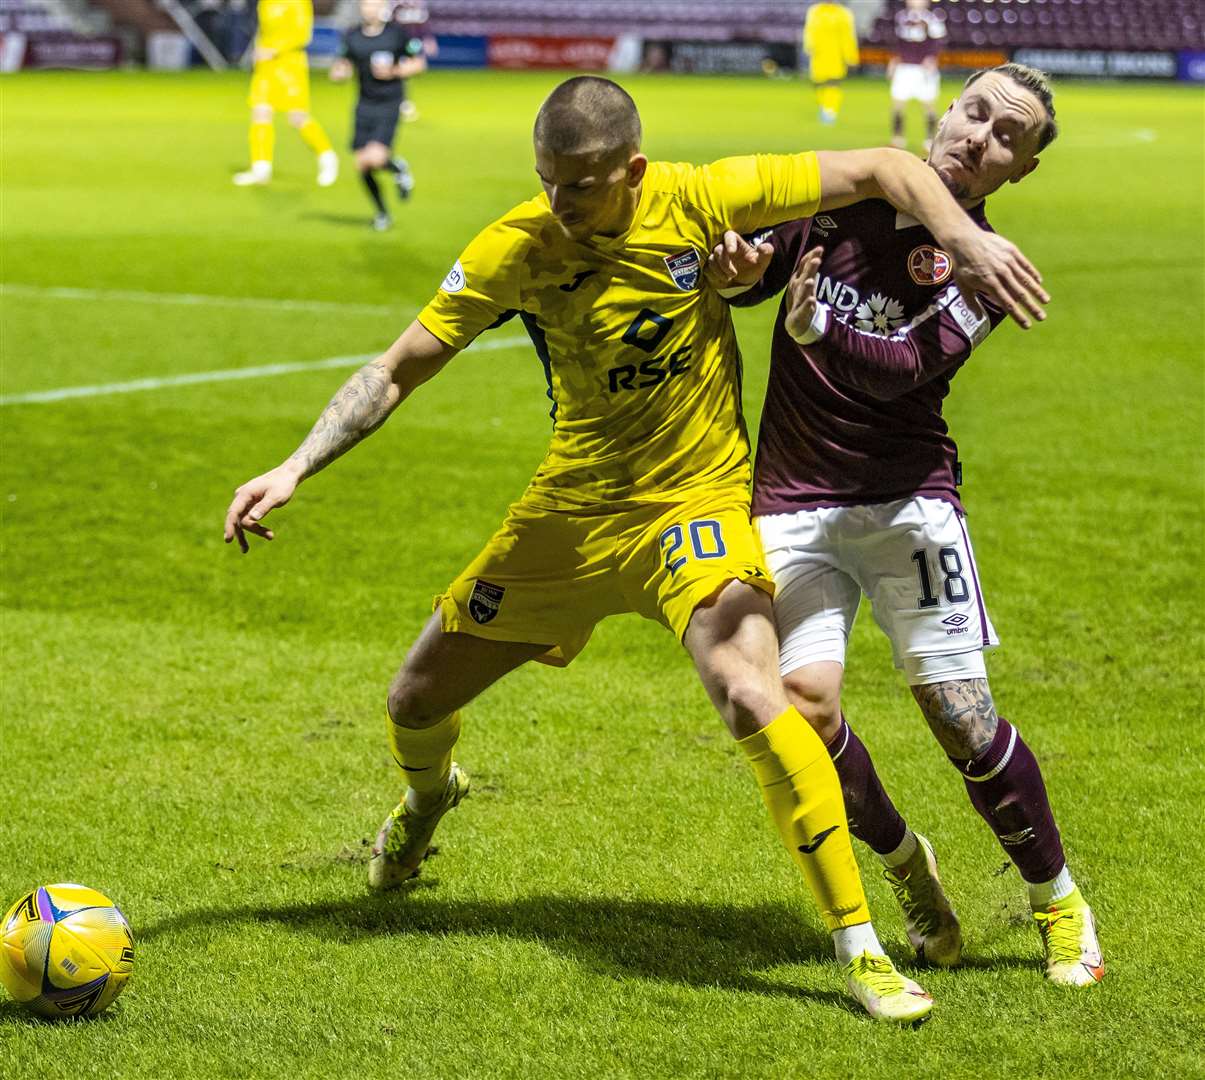 26-12-2021 Sport - football - SPFL Premiership tie. Hearts V Ross County FT 2-1 Harry Clarke (Ross County) and Barrie McKay (Hearts) Pic:Andy Barr www.andybarr.com Copyright Andrew Barr Photography. No reuse without permission. andybarr@mac.com +44 797492391901-05-2021